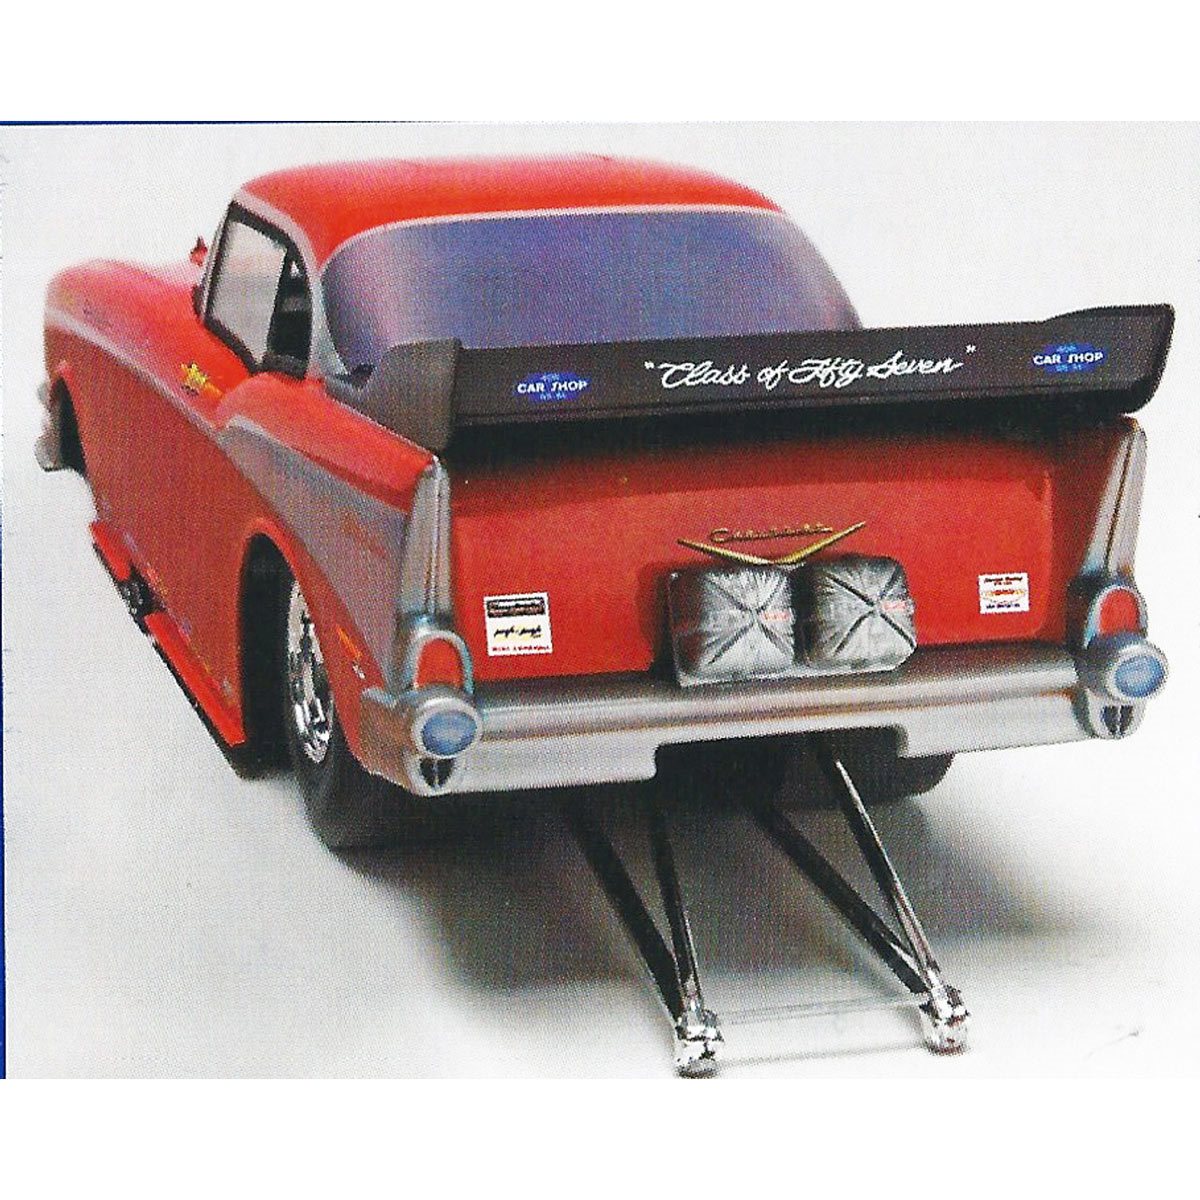 Chevy, Chevrolet scale model car kits.